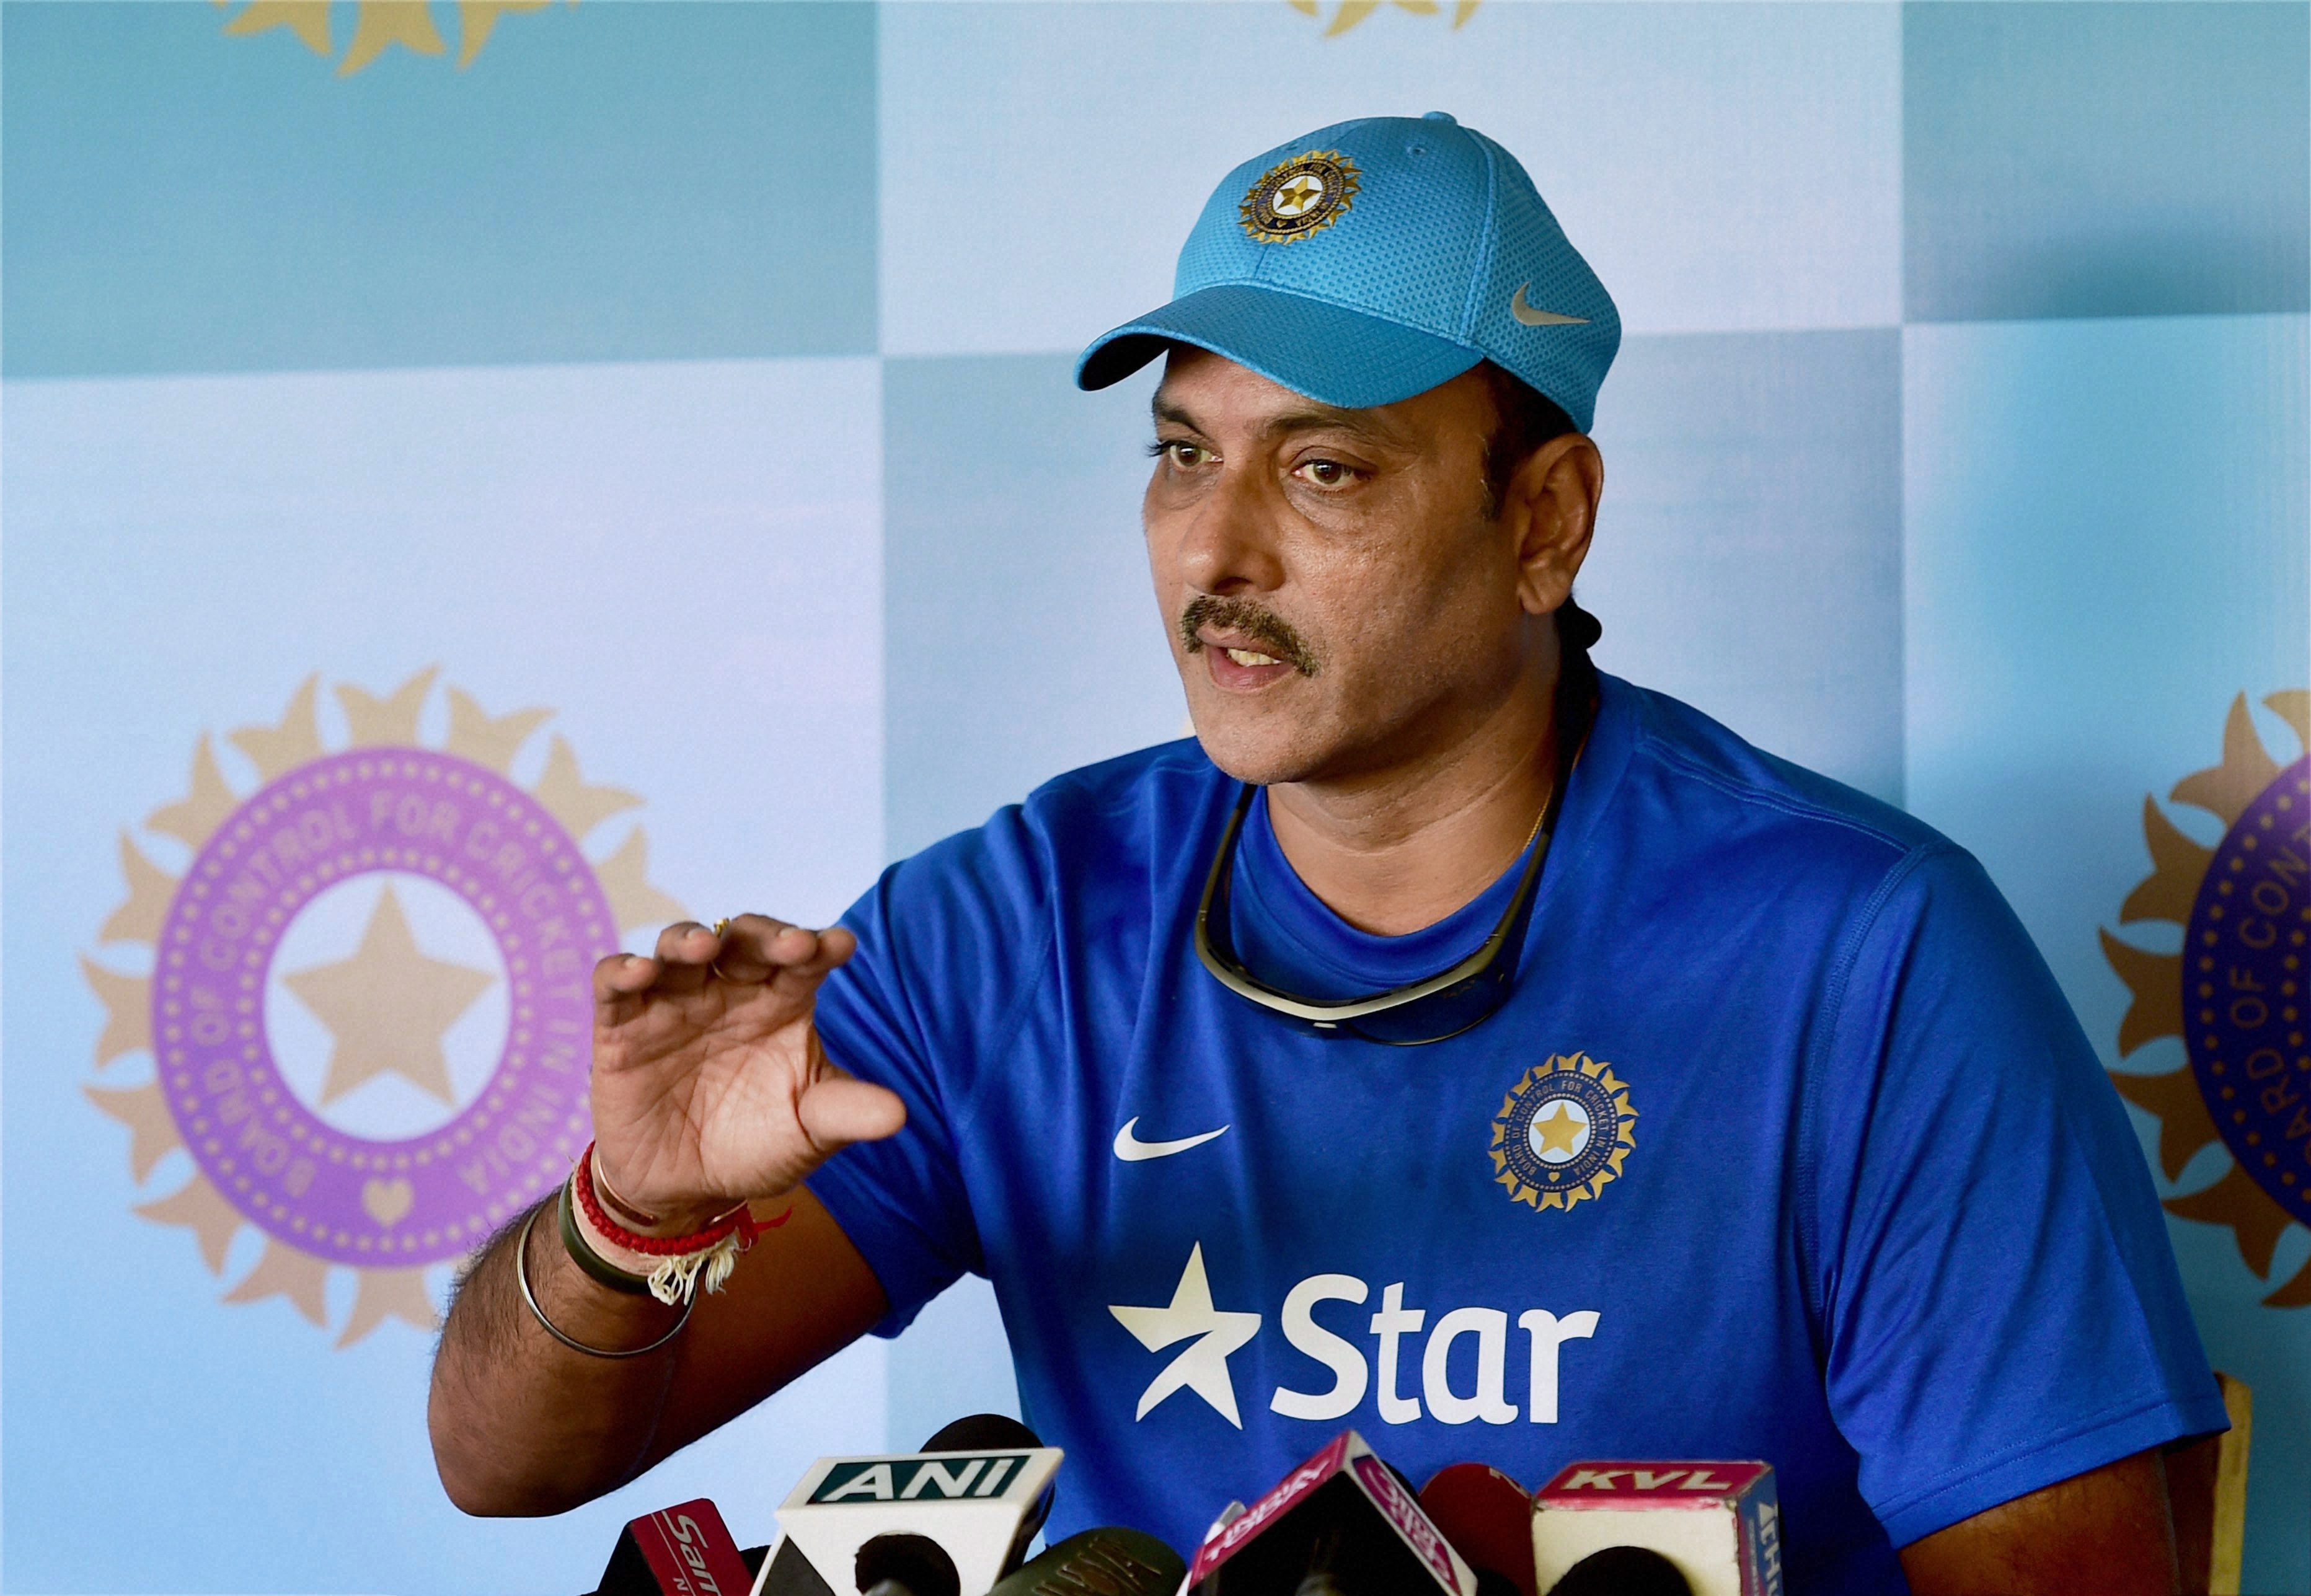 Ravi Shastri Resignation From The ICC Committee Shows He Is Still Quite Pissed